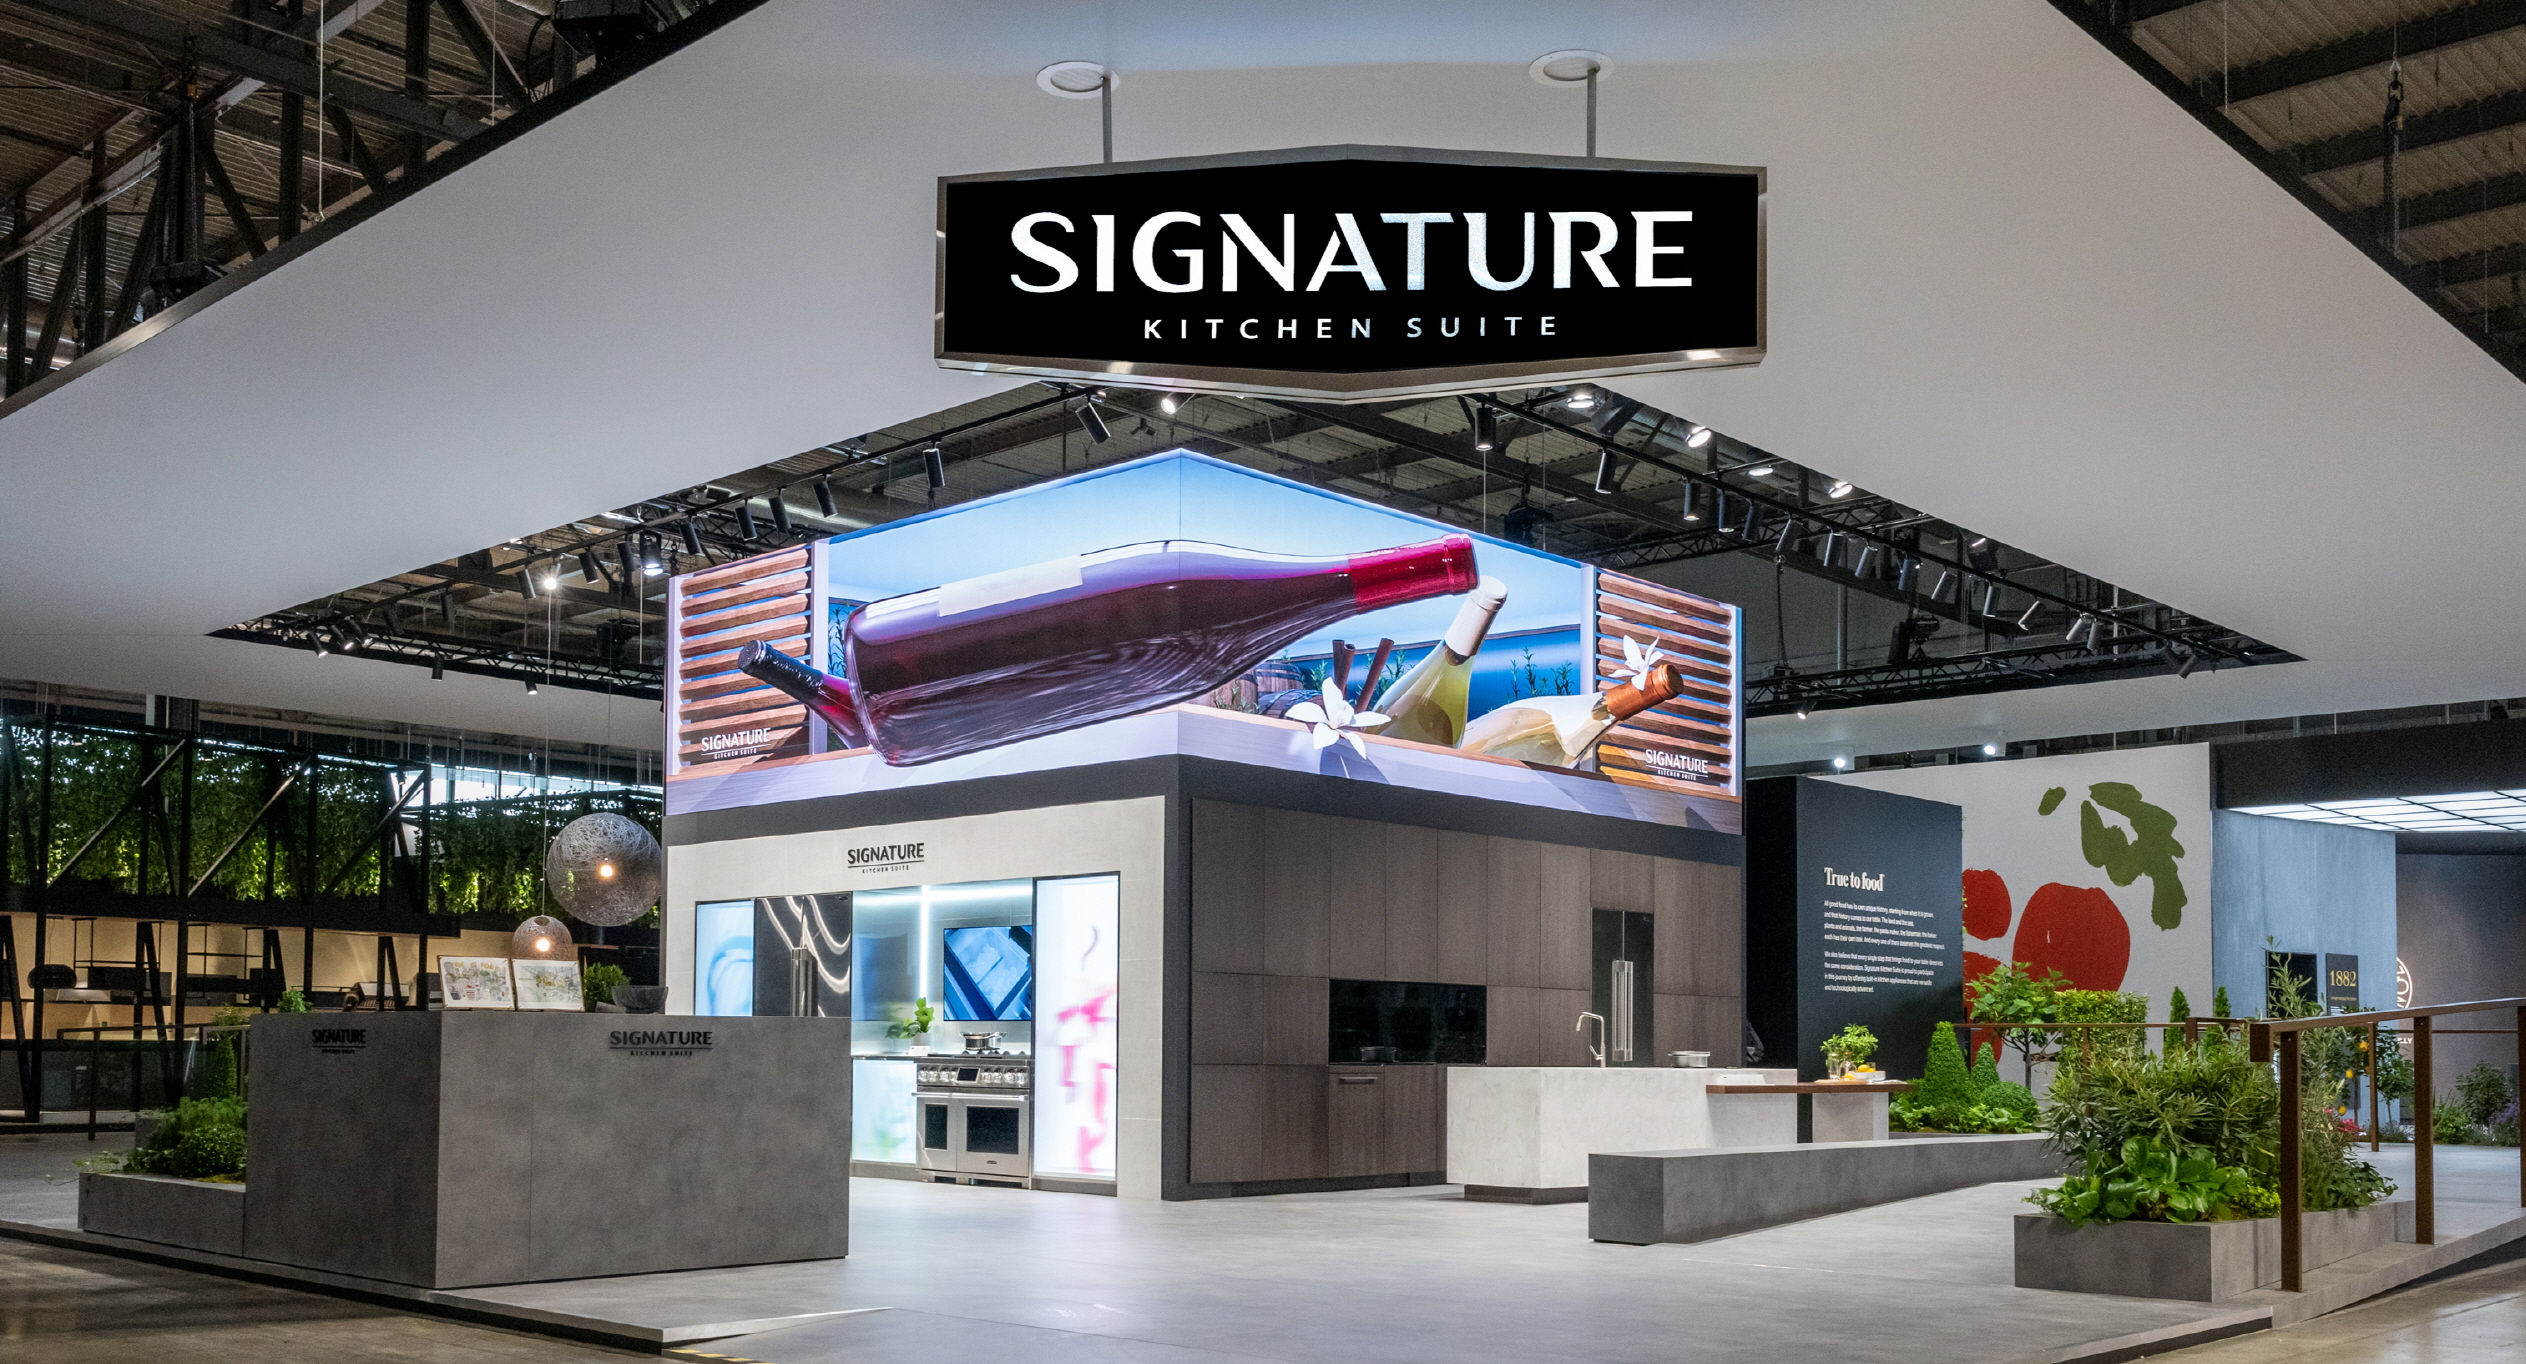 The view of LG SIGNATURE's EuroCucina Booth